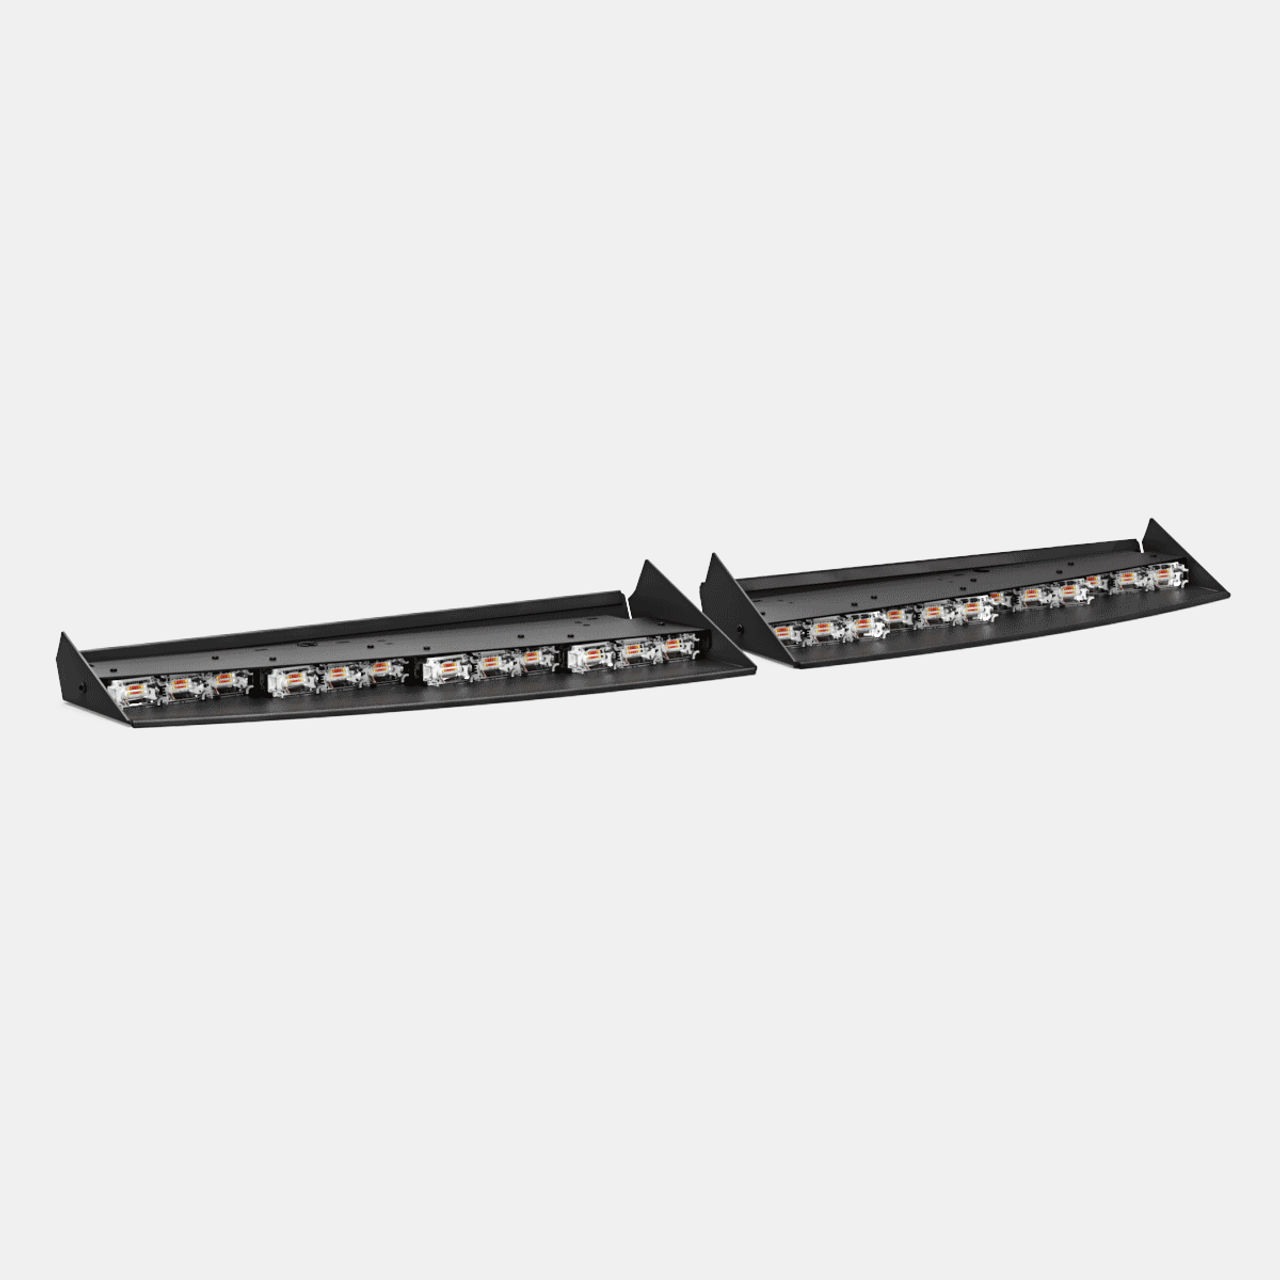 Feniex Q-1521-TAH-21-22 Quad, Chevy Tahoe, Suburban, GMC Yukon,  2021-2022 Interior Light Bar, Front Facing, Four LED Colors Each Side (Red, Blue, White and Amber)